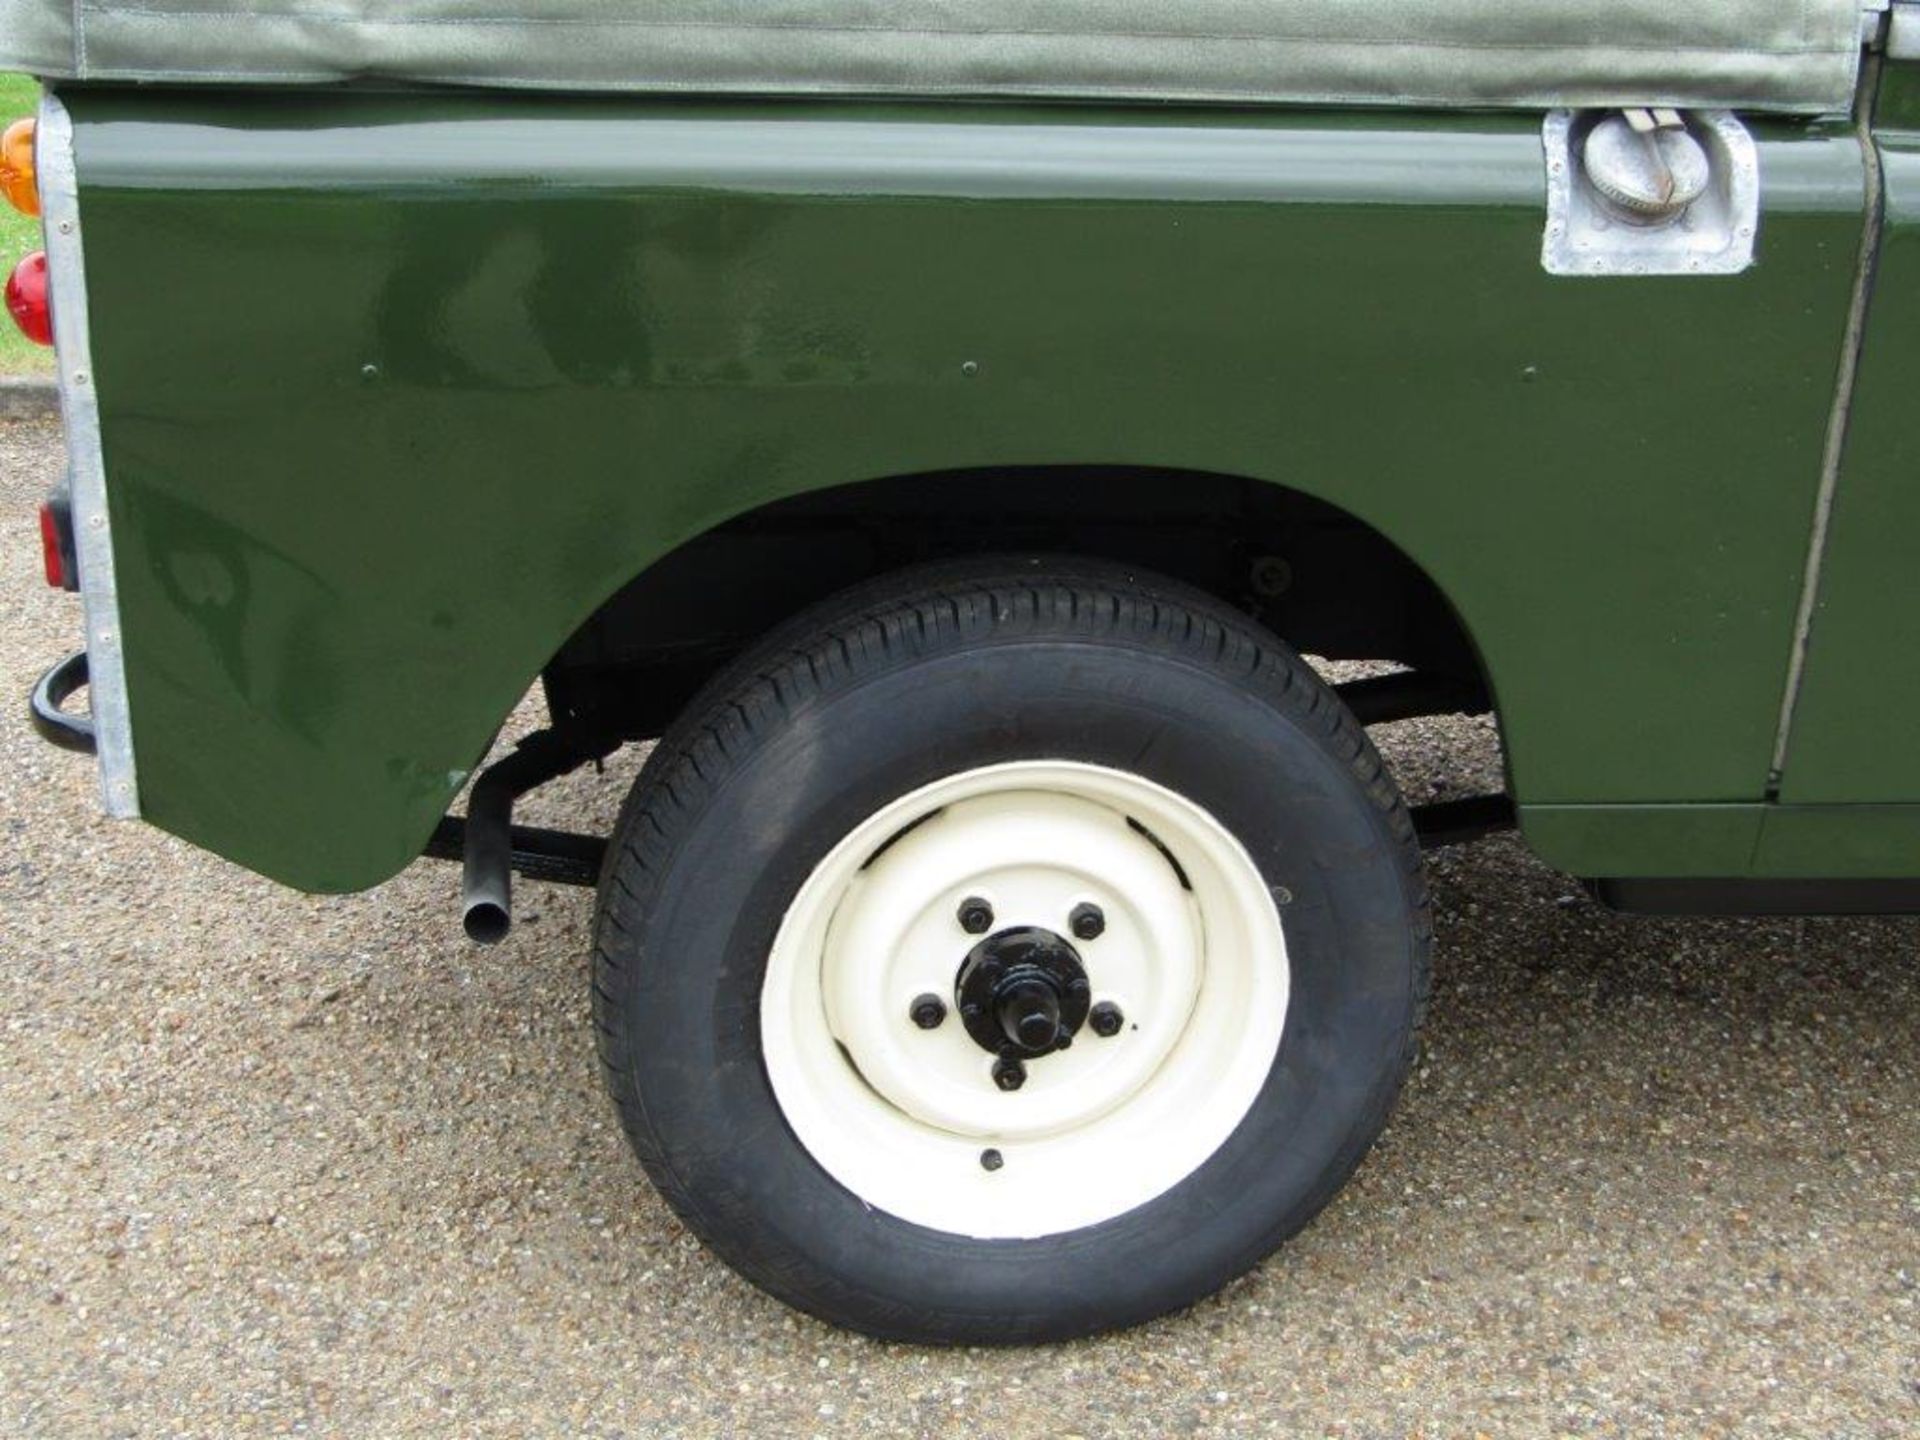 1980 Land Rover Series III - Image 9 of 25